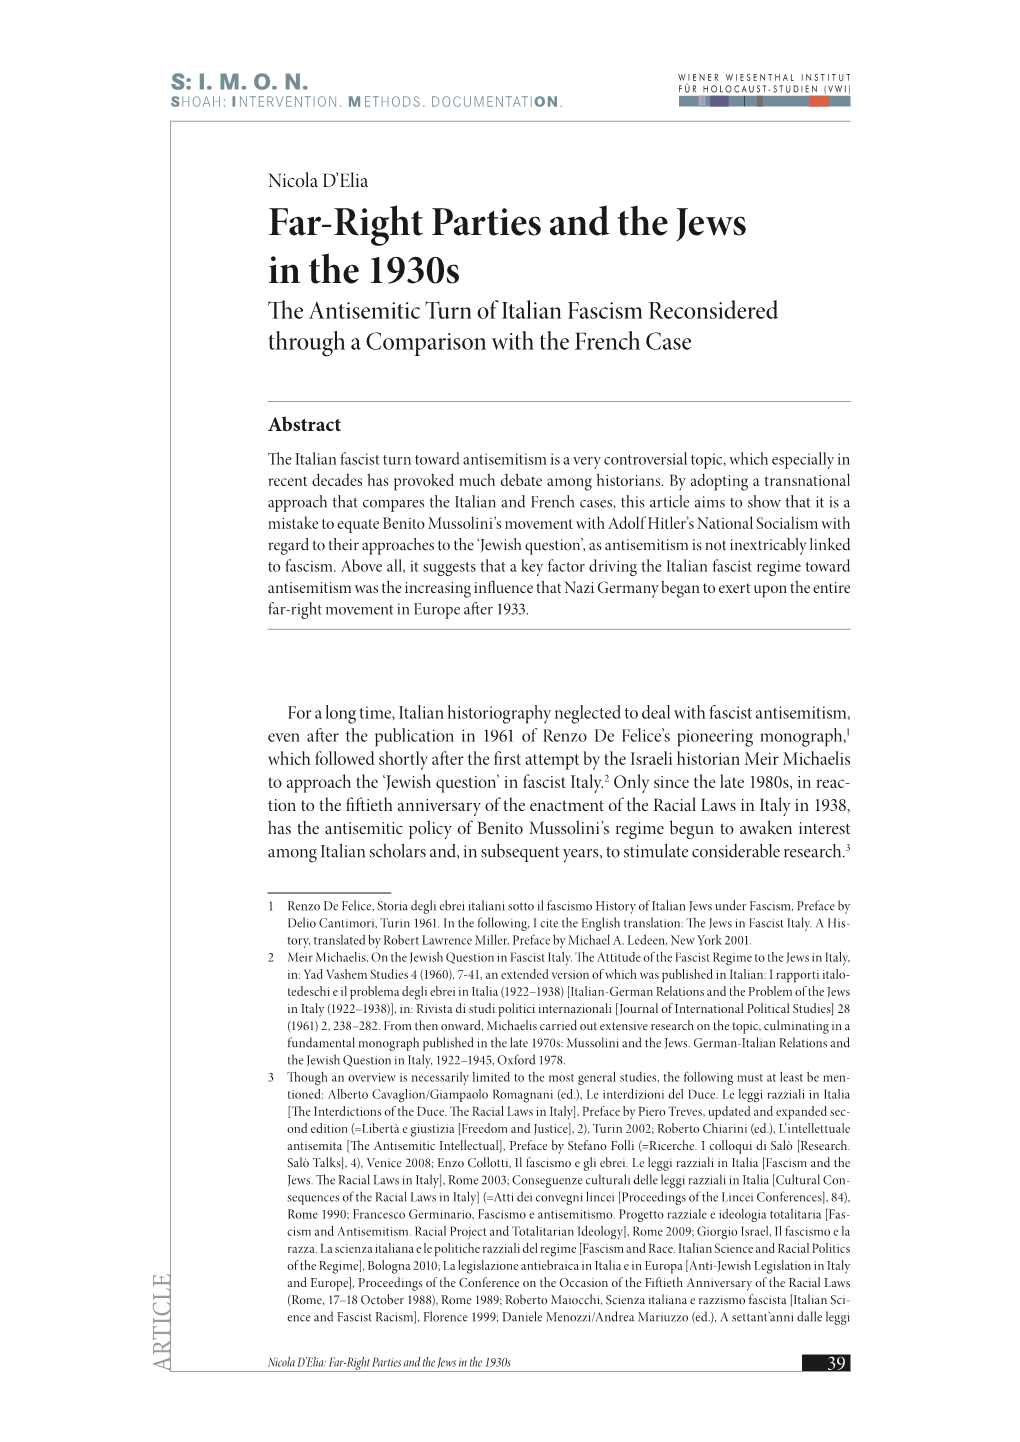 Far-Right Parties and the Jews in the 1930S the Antisemitic Turn of Italian Fascism Reconsidered Through a Comparison with the French Case